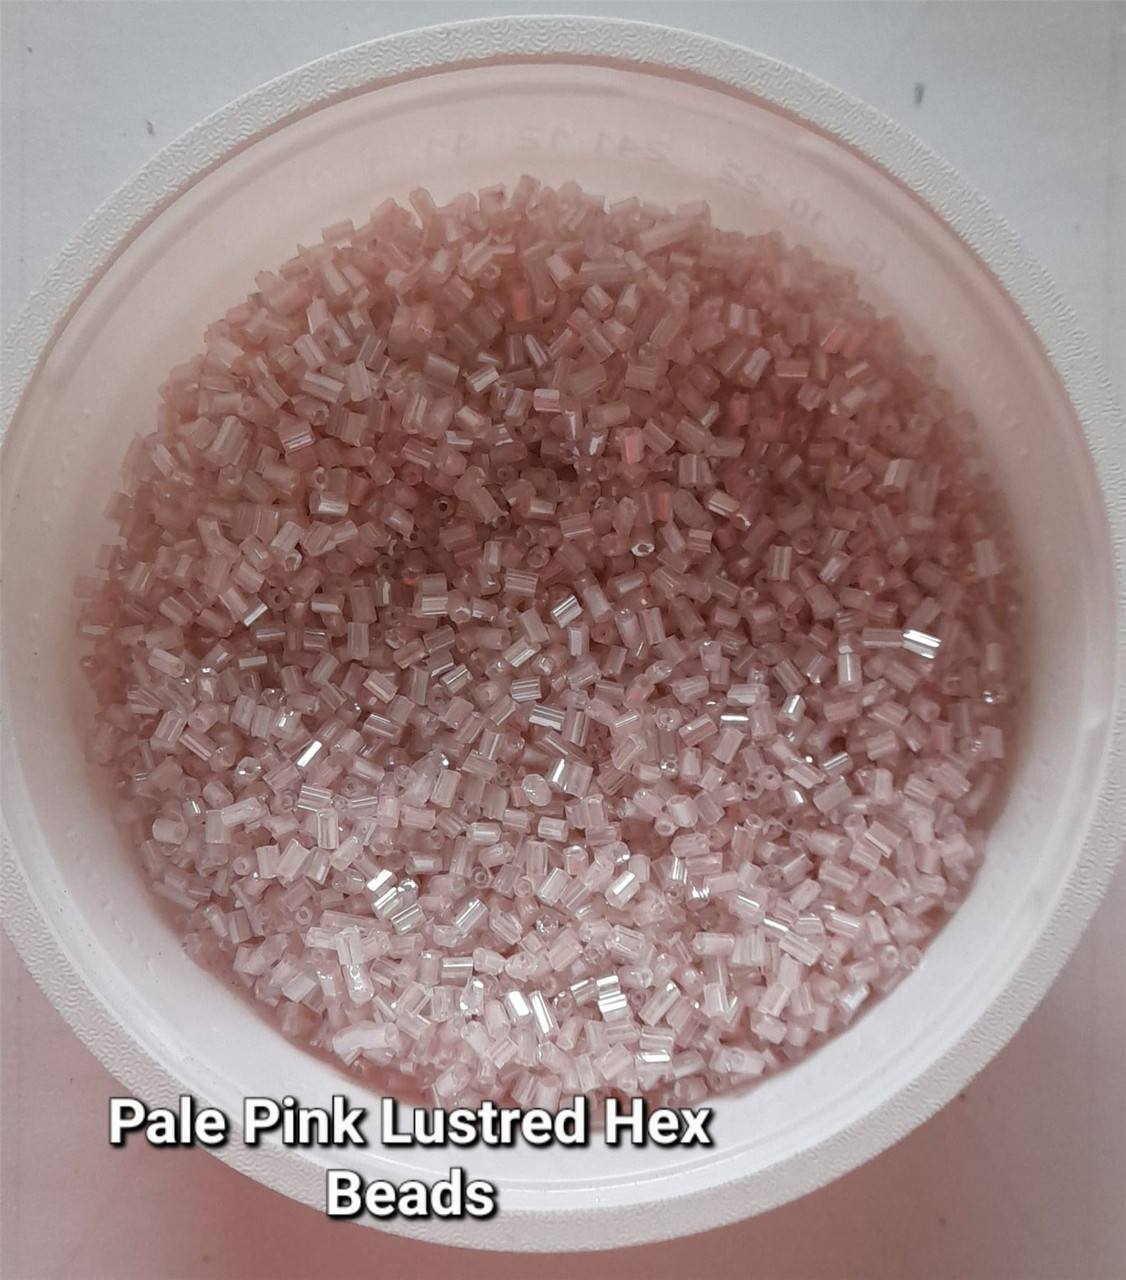 50g glass HEX seed beads - Pale Pink Lustred - size 11/0 (approx 2mm)